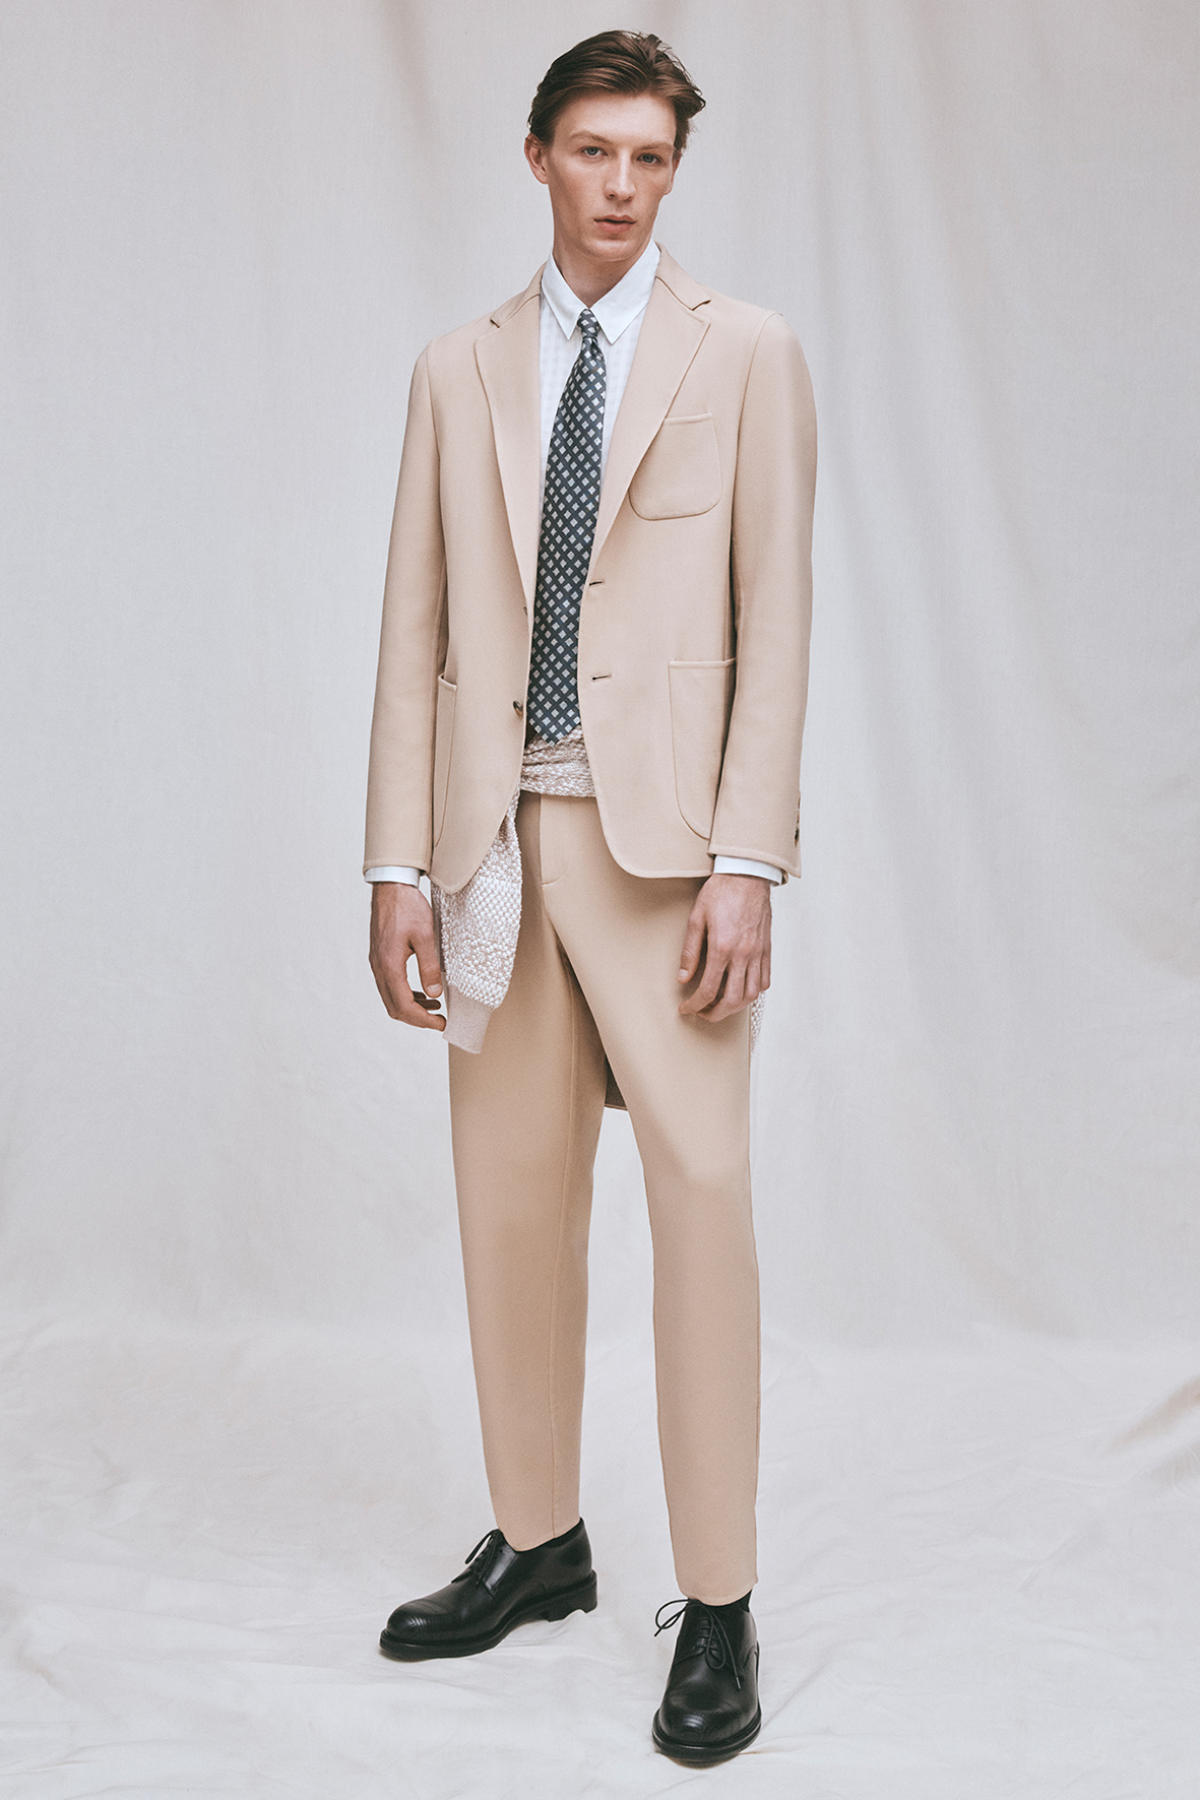 Canali Presents Its New Spring/Summer 2024 Collection: Mediterranean Craft